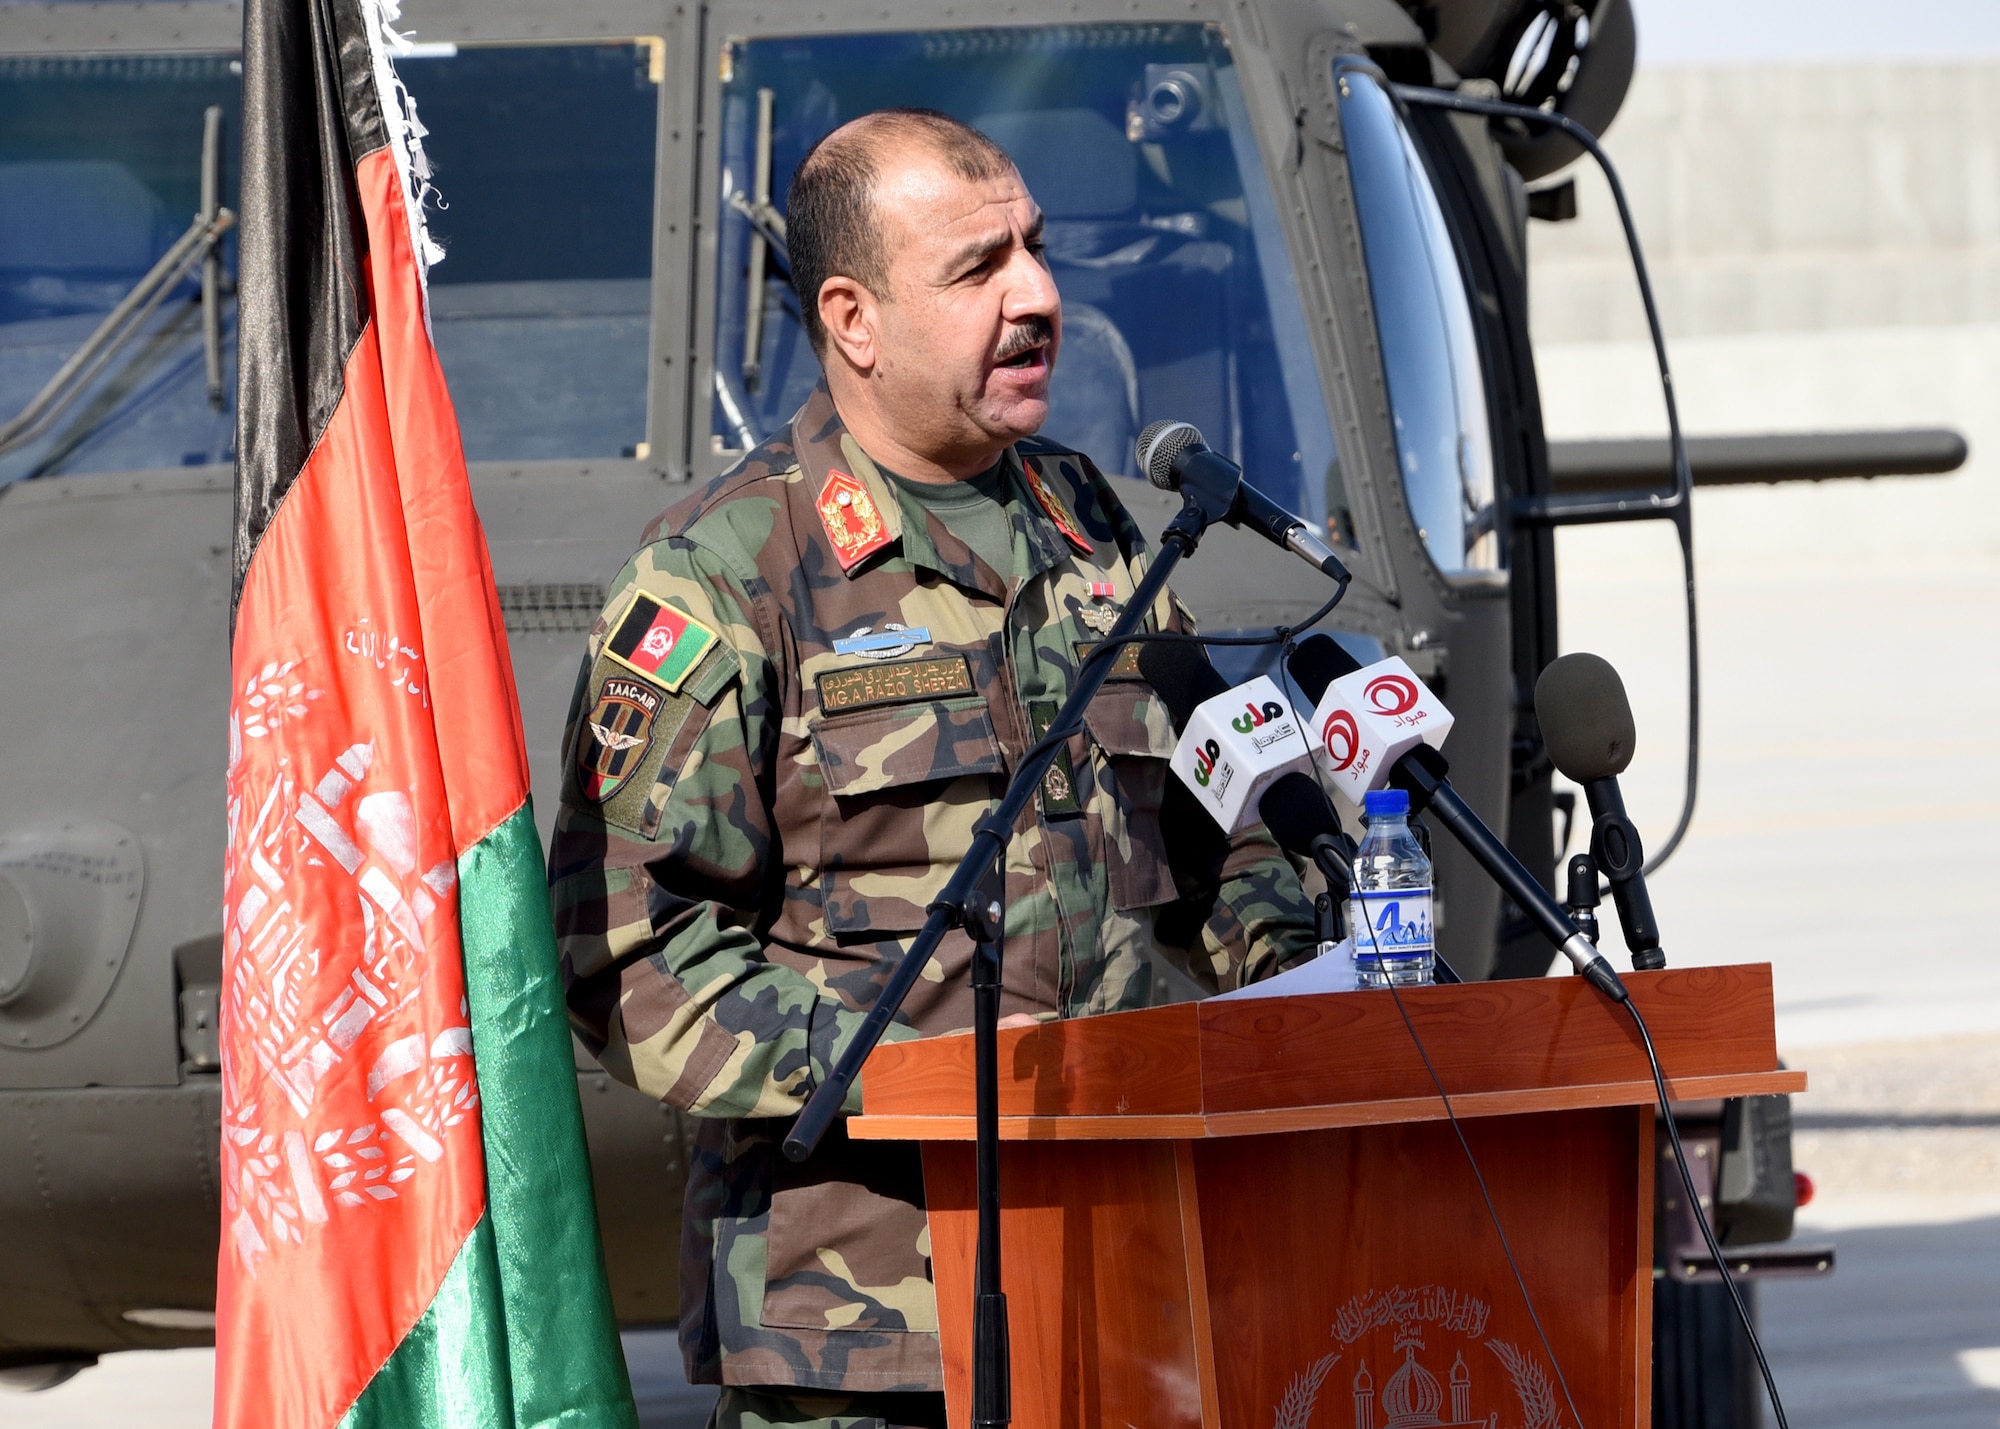 Afghan Air Force Maj. Gen. Abdul Raziq Sherzai, Kandahar Air Wing commander, addresses the first AAF UH-60 Black Hawk pilots during an Aircraft Qualification Training graduation ceremony at Kandahar Airfield, Afghanistan, Nov. 20, 2017. The six pilots are the first to transition from the Mi-17 Hip, as part of a lager modernization program. The AAF is expecting to have four qualified crews by fighting season 2018, and 32 crews by fighting season 2019.  (U.S. Air Force photo by Tech. Sgt. Veronica Pierce)